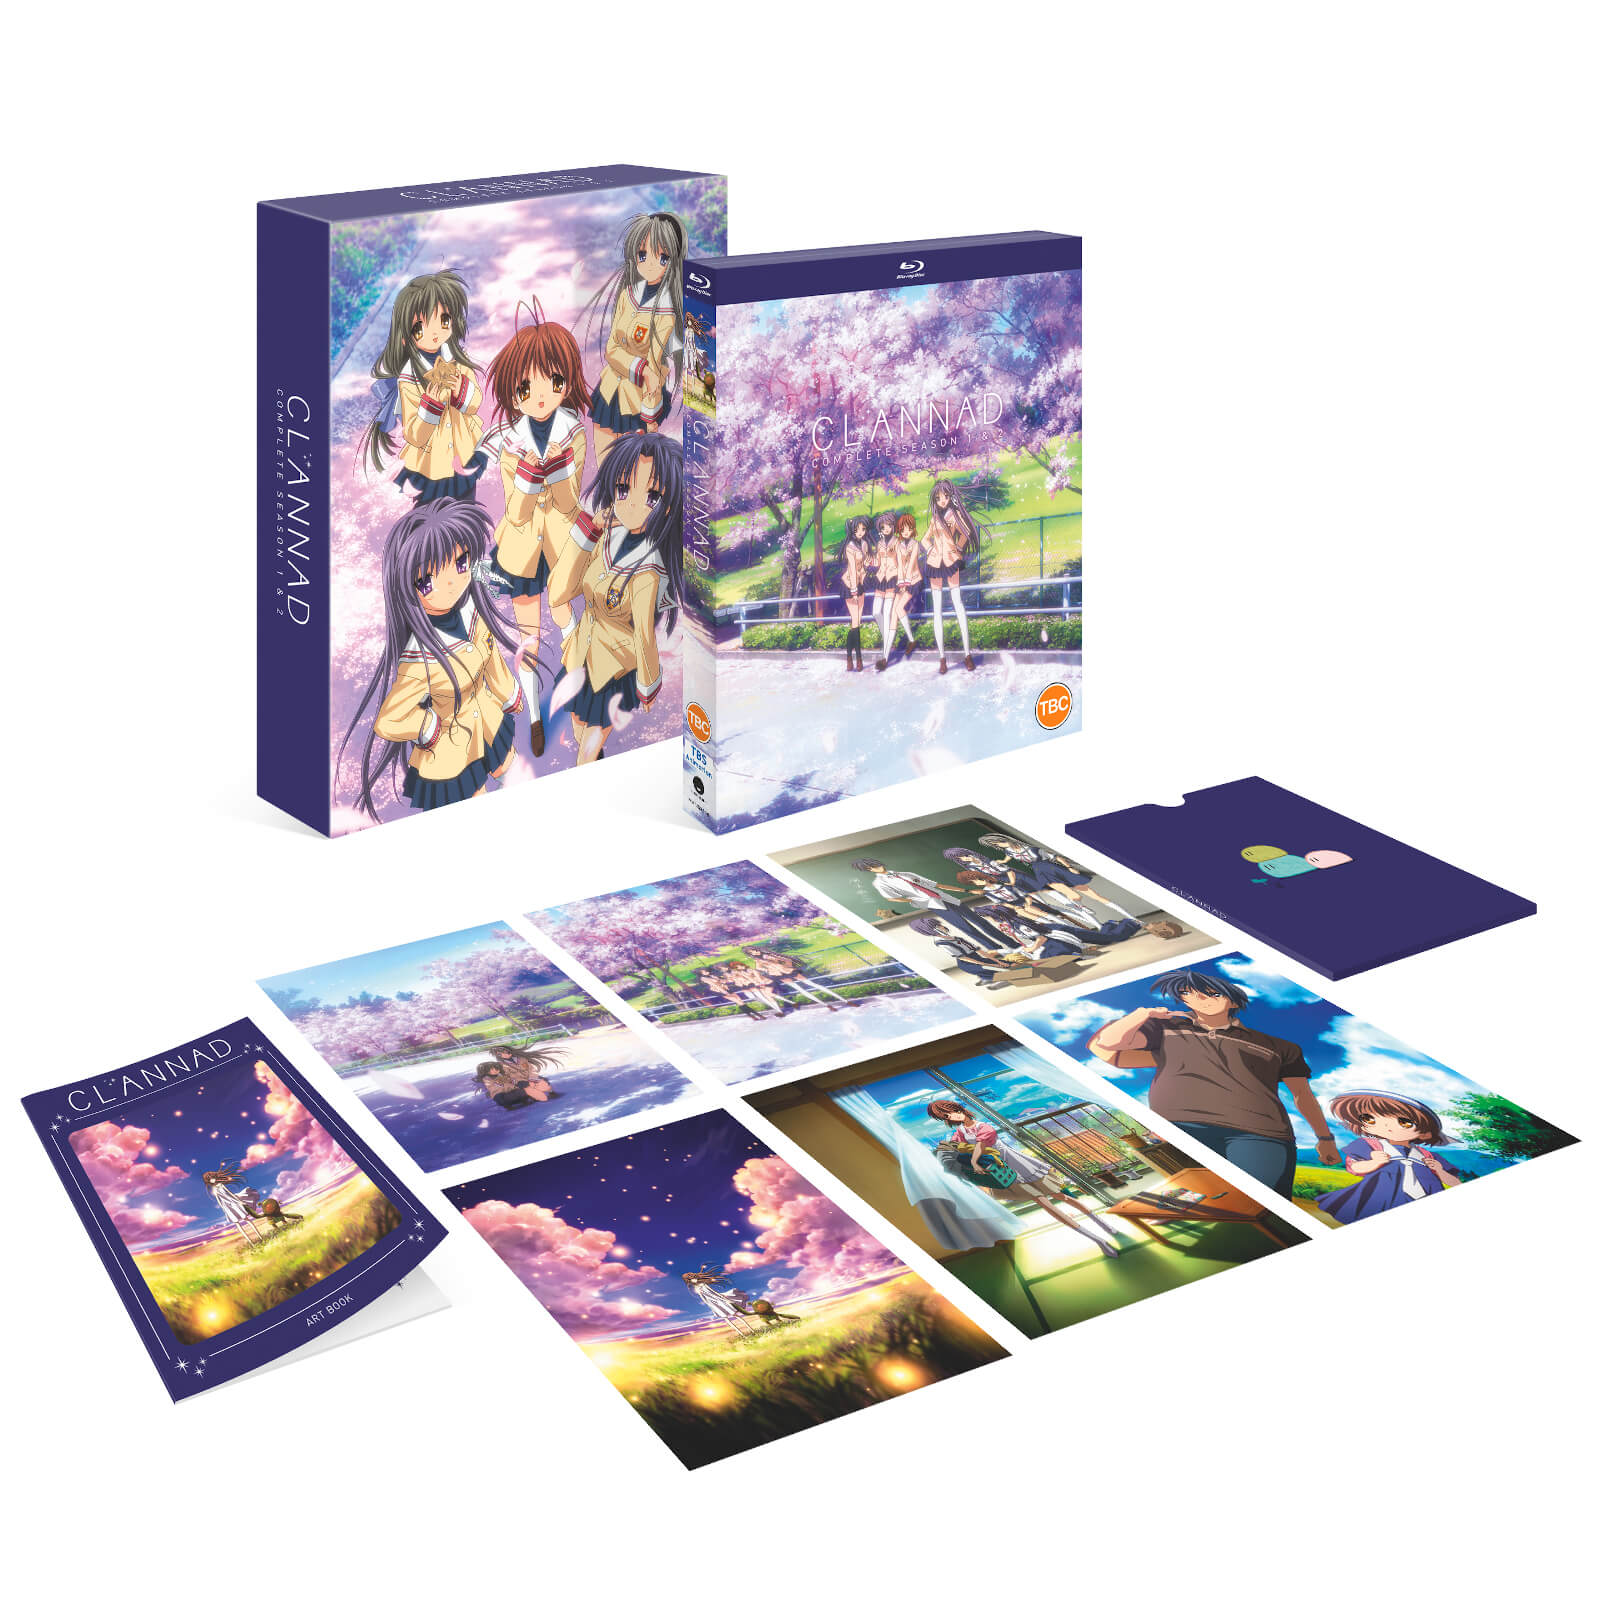 Clannad: After Story - Complete Anime Collection (Brand New 4 DVD Set, 2011)